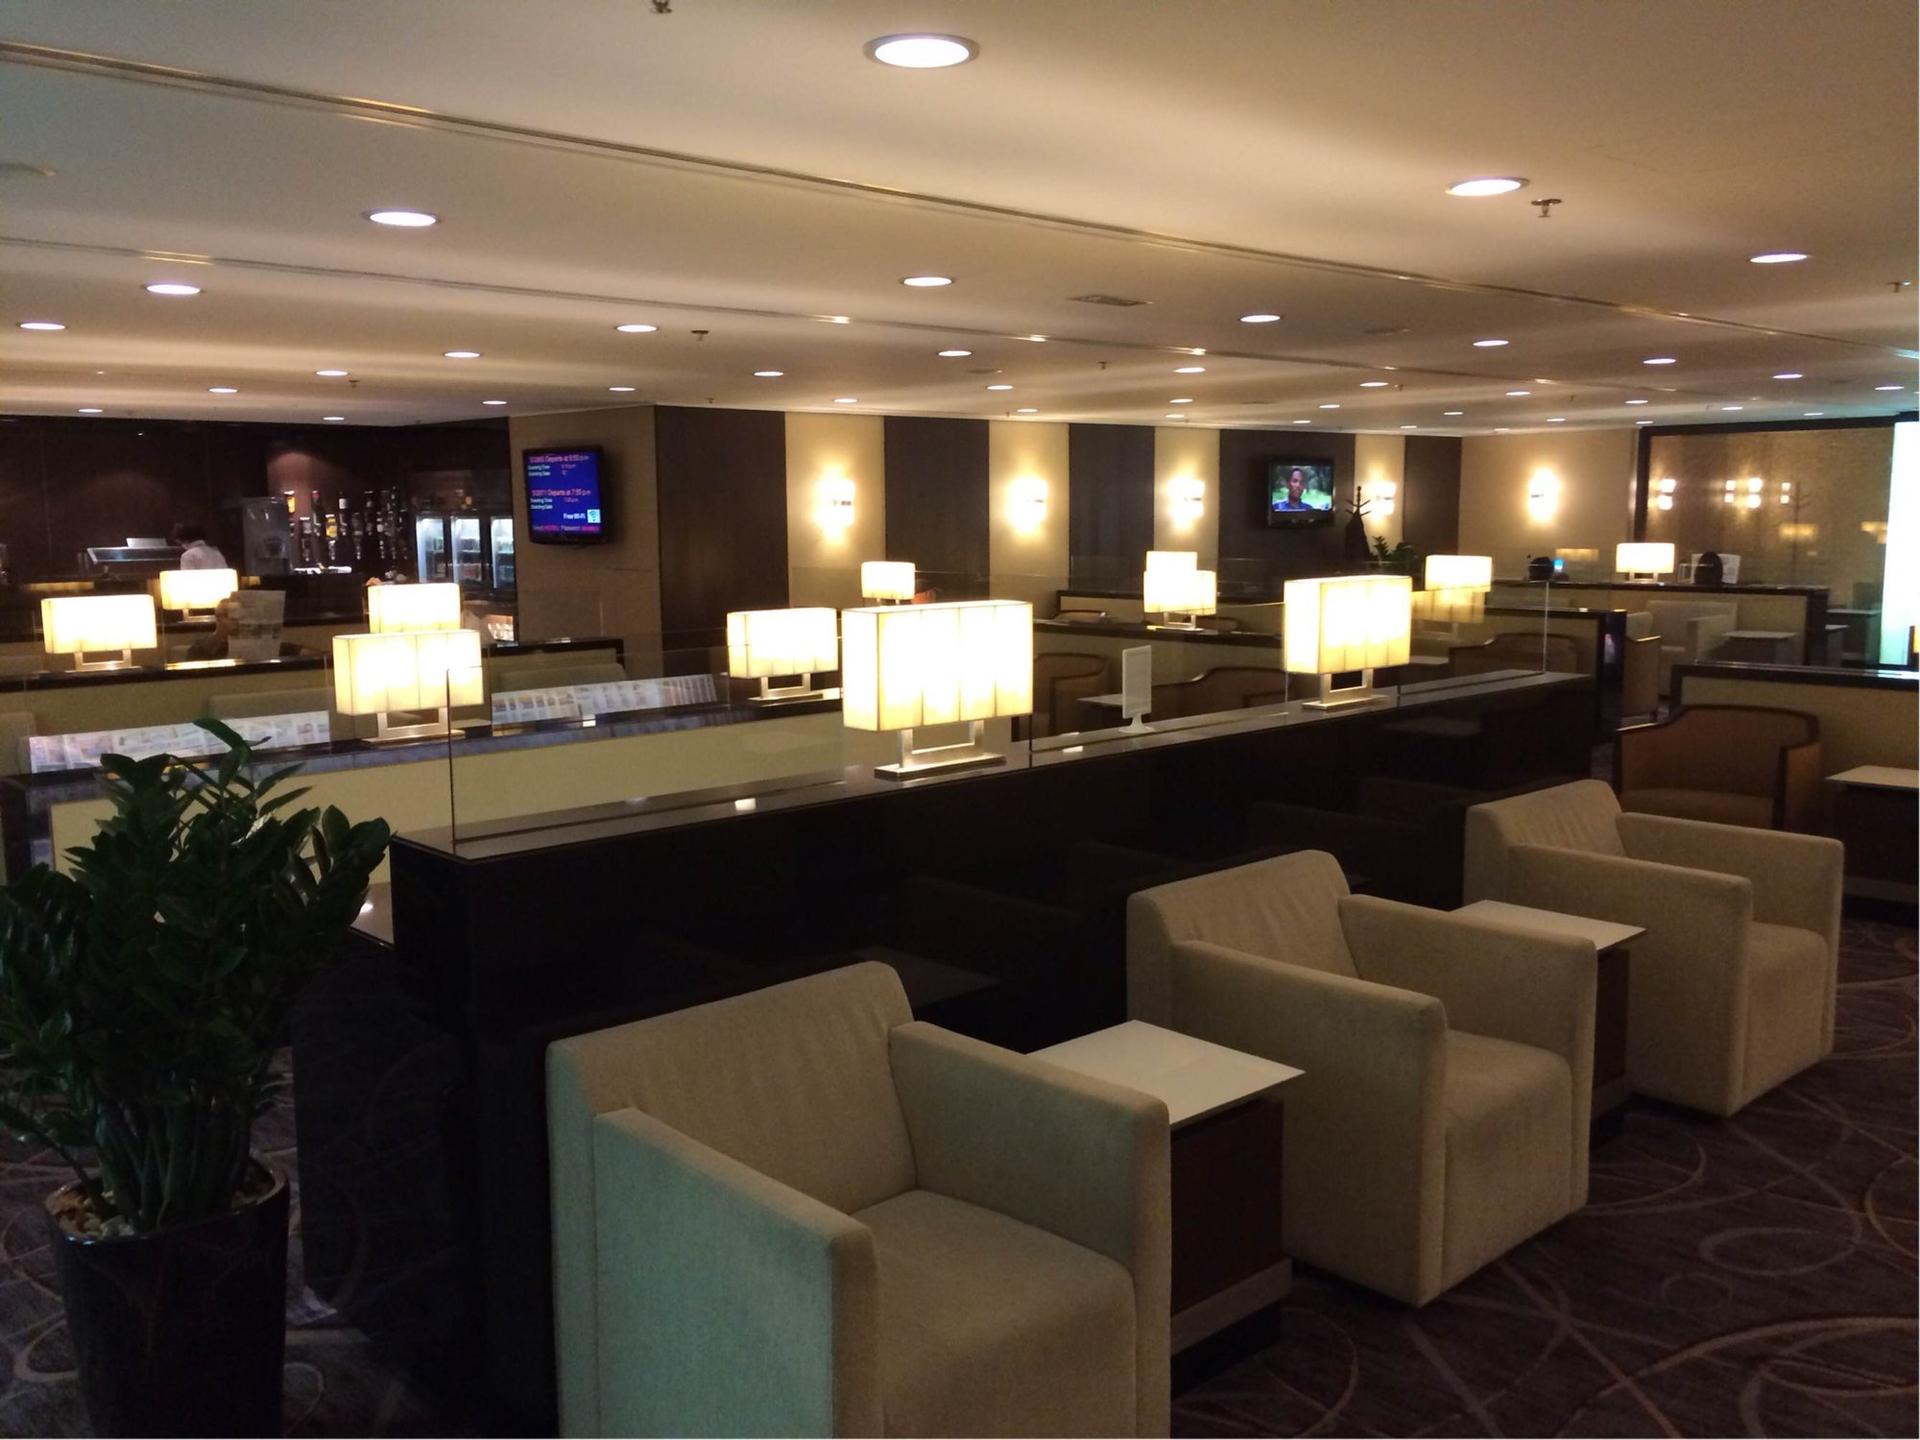 Singapore Airlines SilverKris Business Class Lounge image 29 of 68